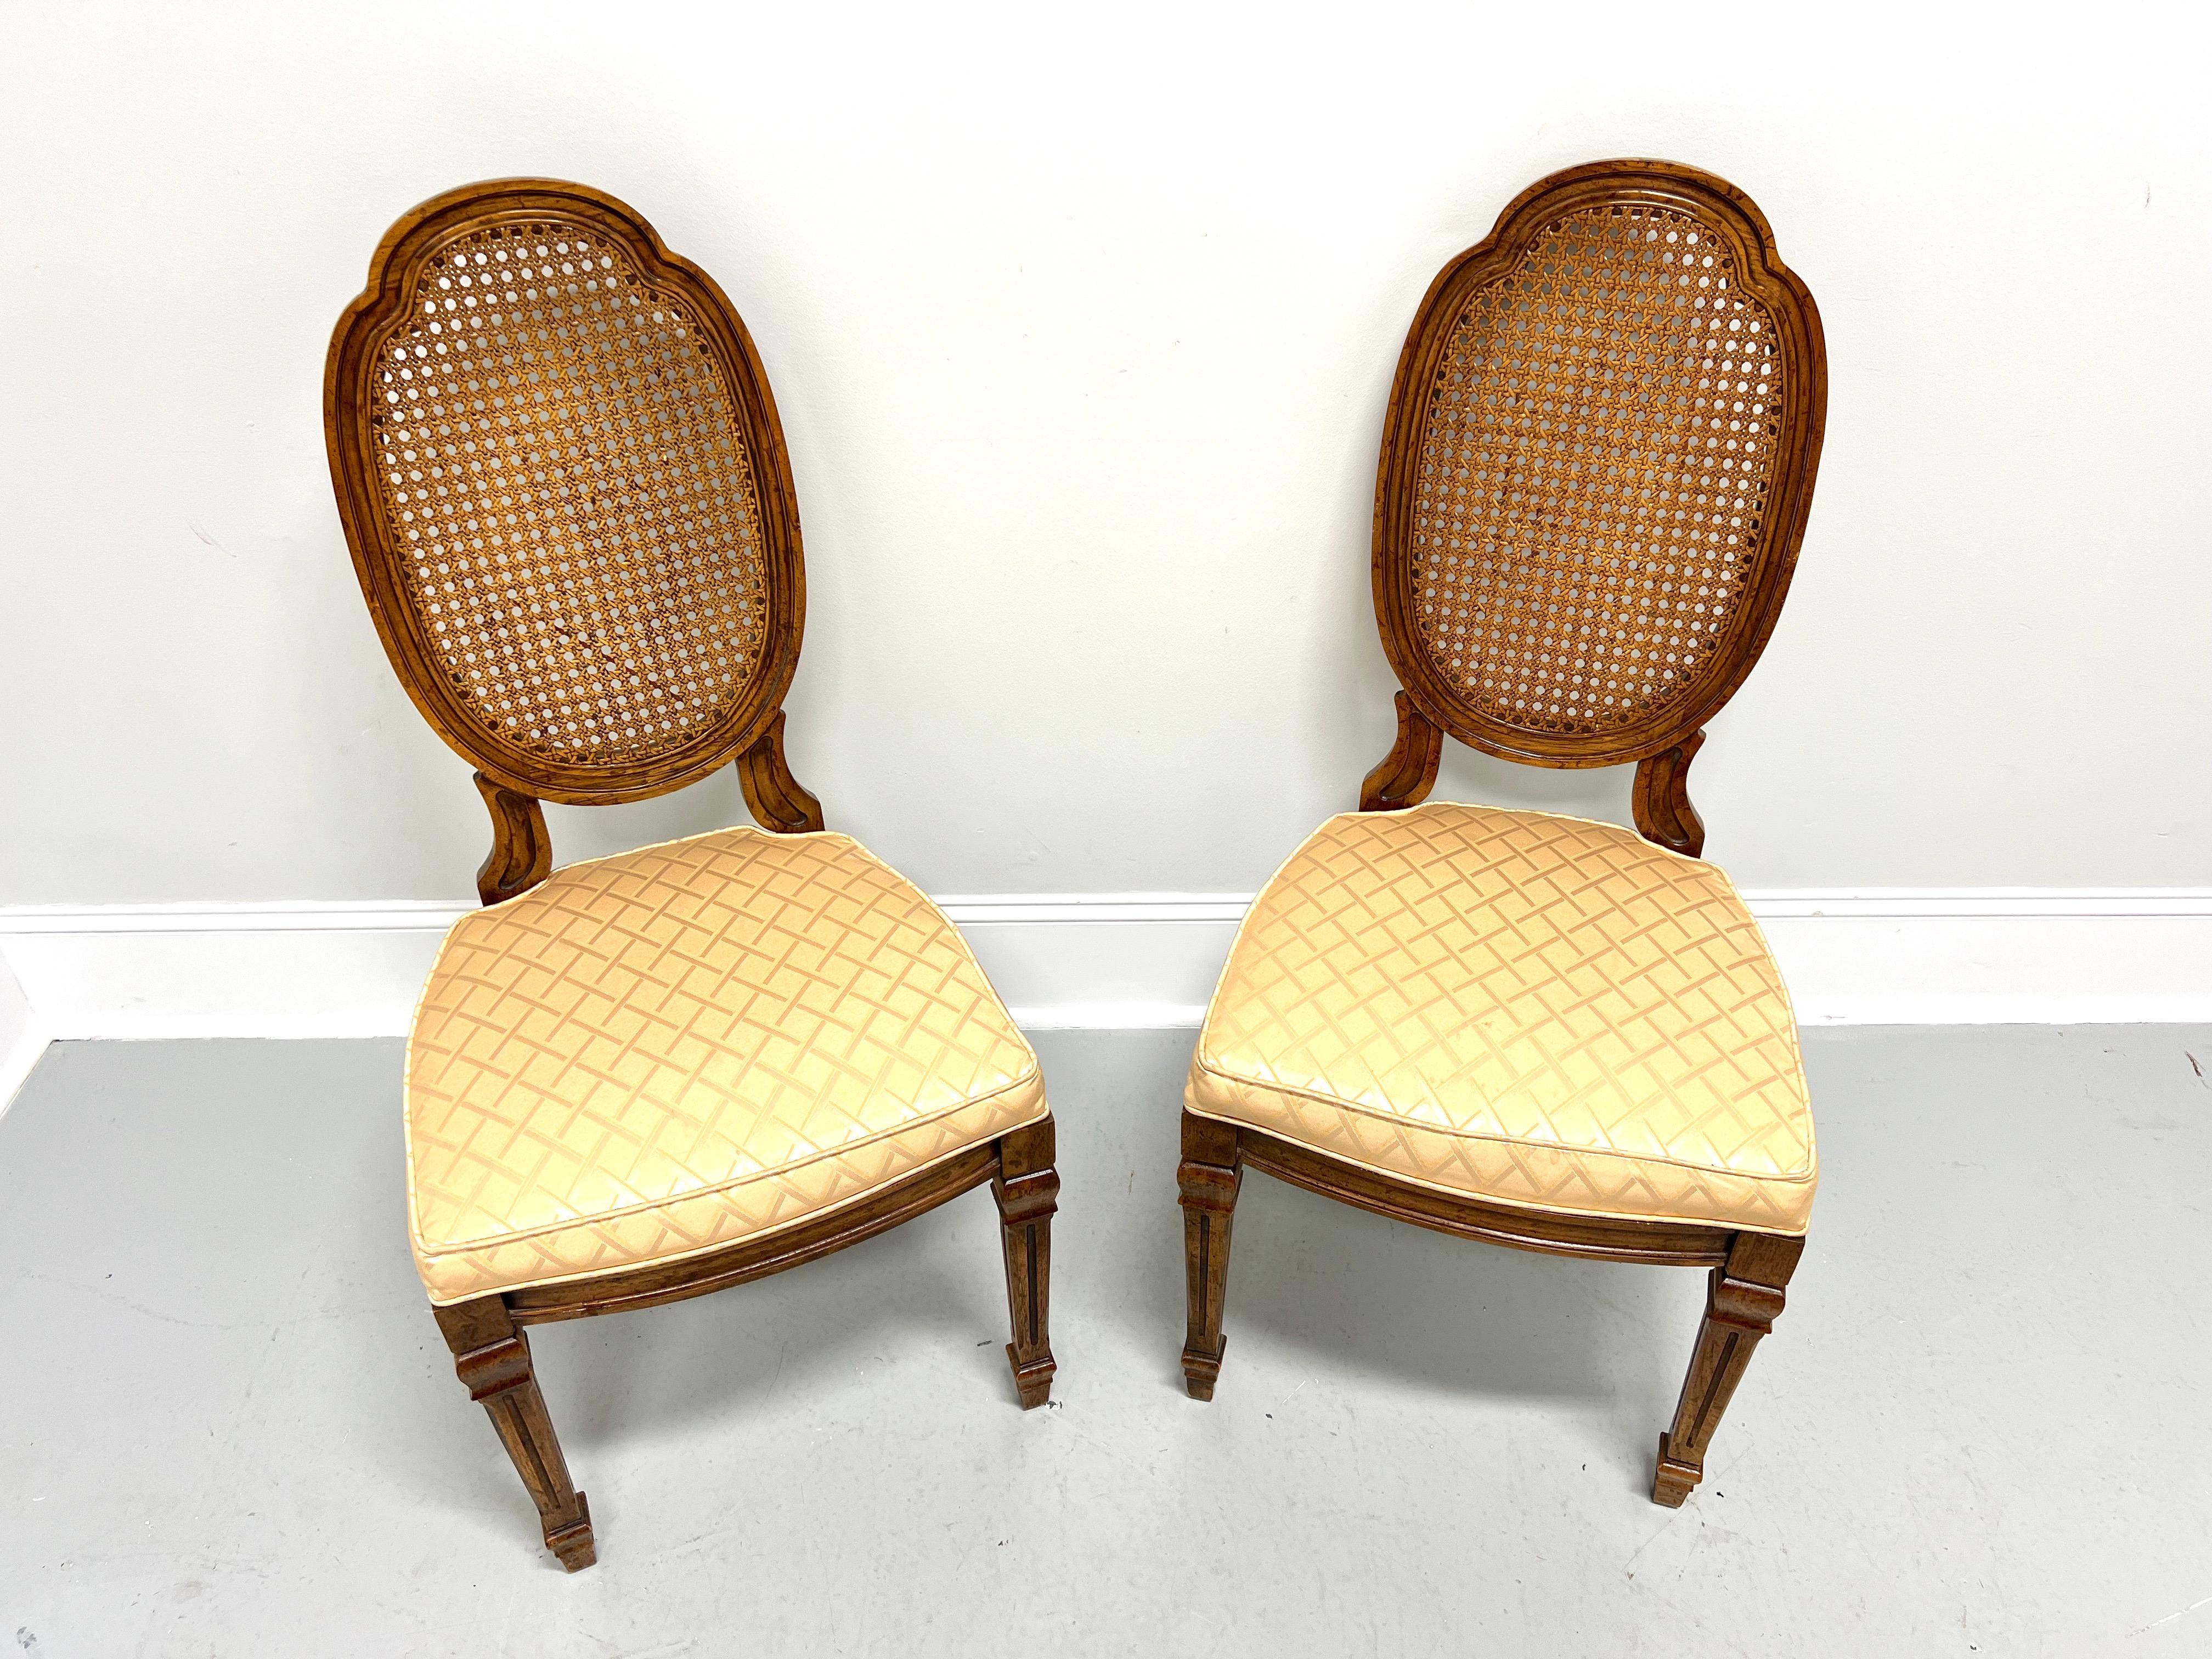 A pair of French Provincial Louis XVI style dining side chairs by Drexel Heritage. Walnut with a slightly distressed finish, carved oval shield-like caned backs, gold color diamond pattern fabric upholstered seats, carved apron, tapered fluted